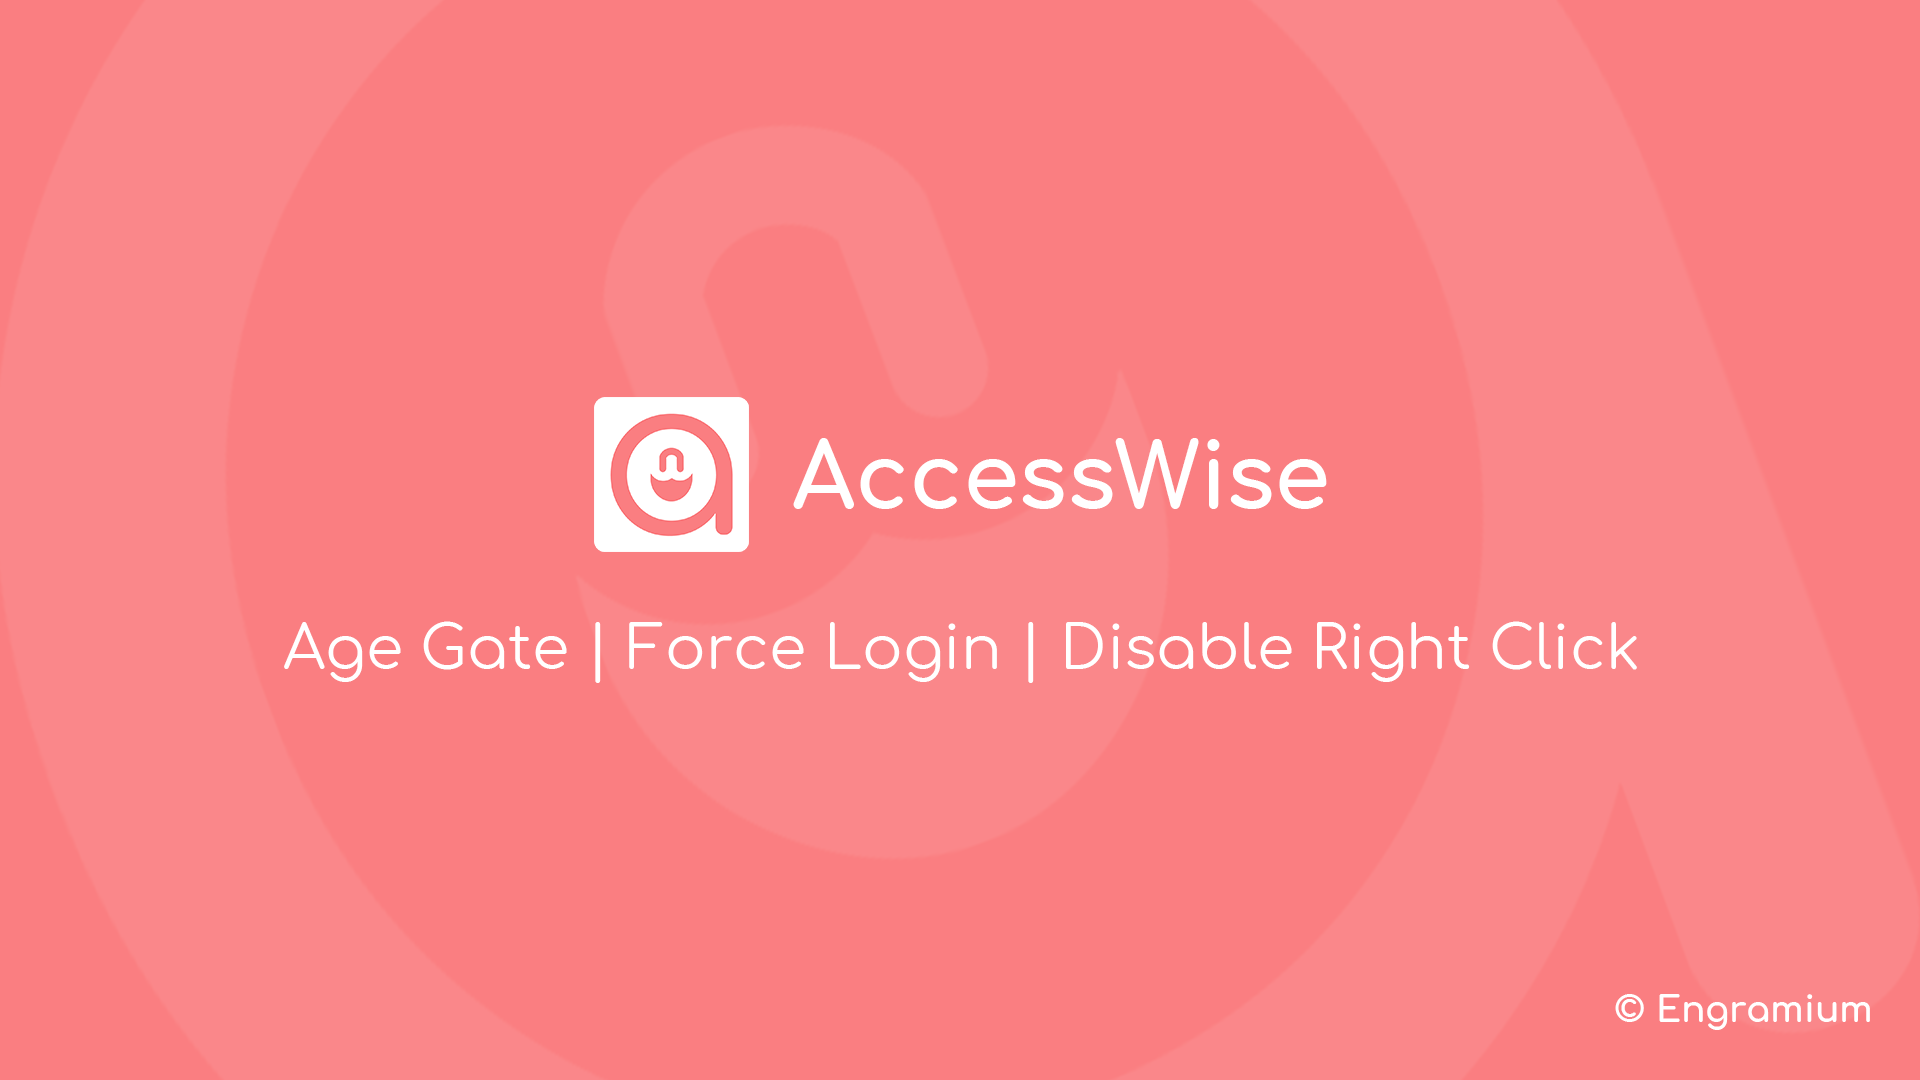 AccessWise Core Features